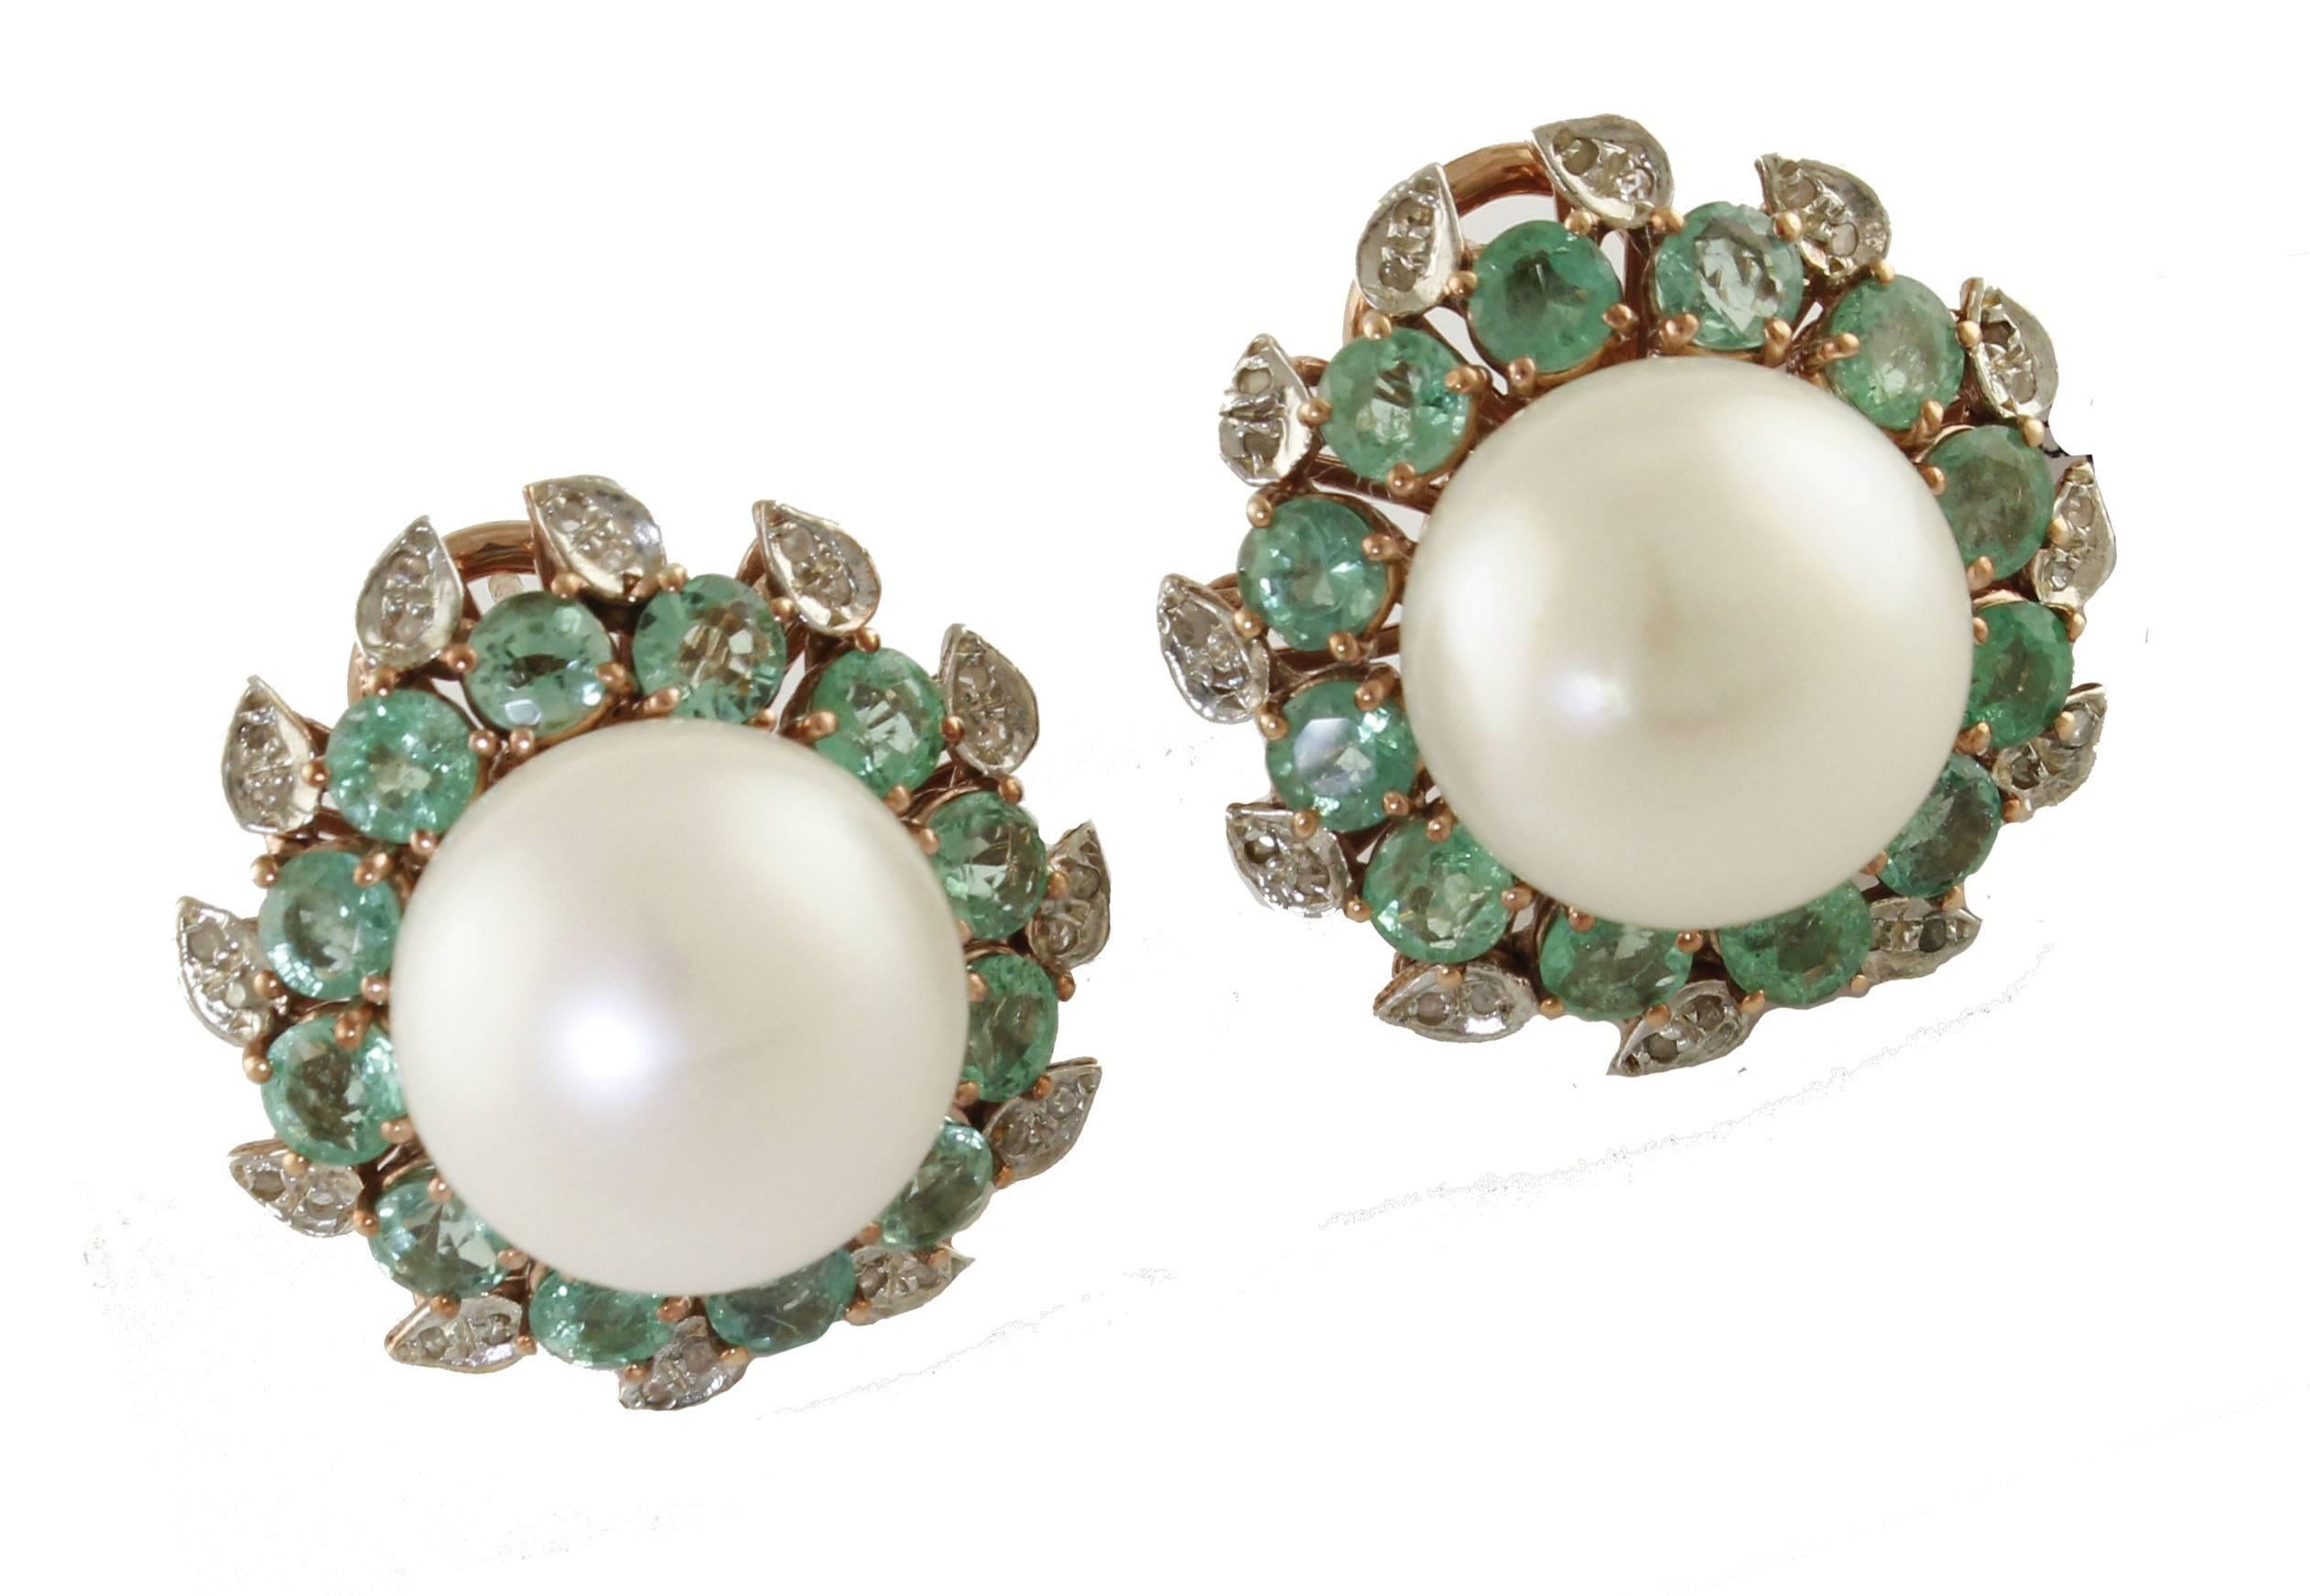 Very elegant 9 kt rose gold and silver clip earrings, with fabulous 14 mm and 5.20 grams central pearl, surrounded by fantastic 5.03 ct emeralds and 0.20 ct diamonds. Totatale weight g 14.6.

Diamonds ct 0.20
Emeralds ct 5.03
Pearl mm 14 / 5.20